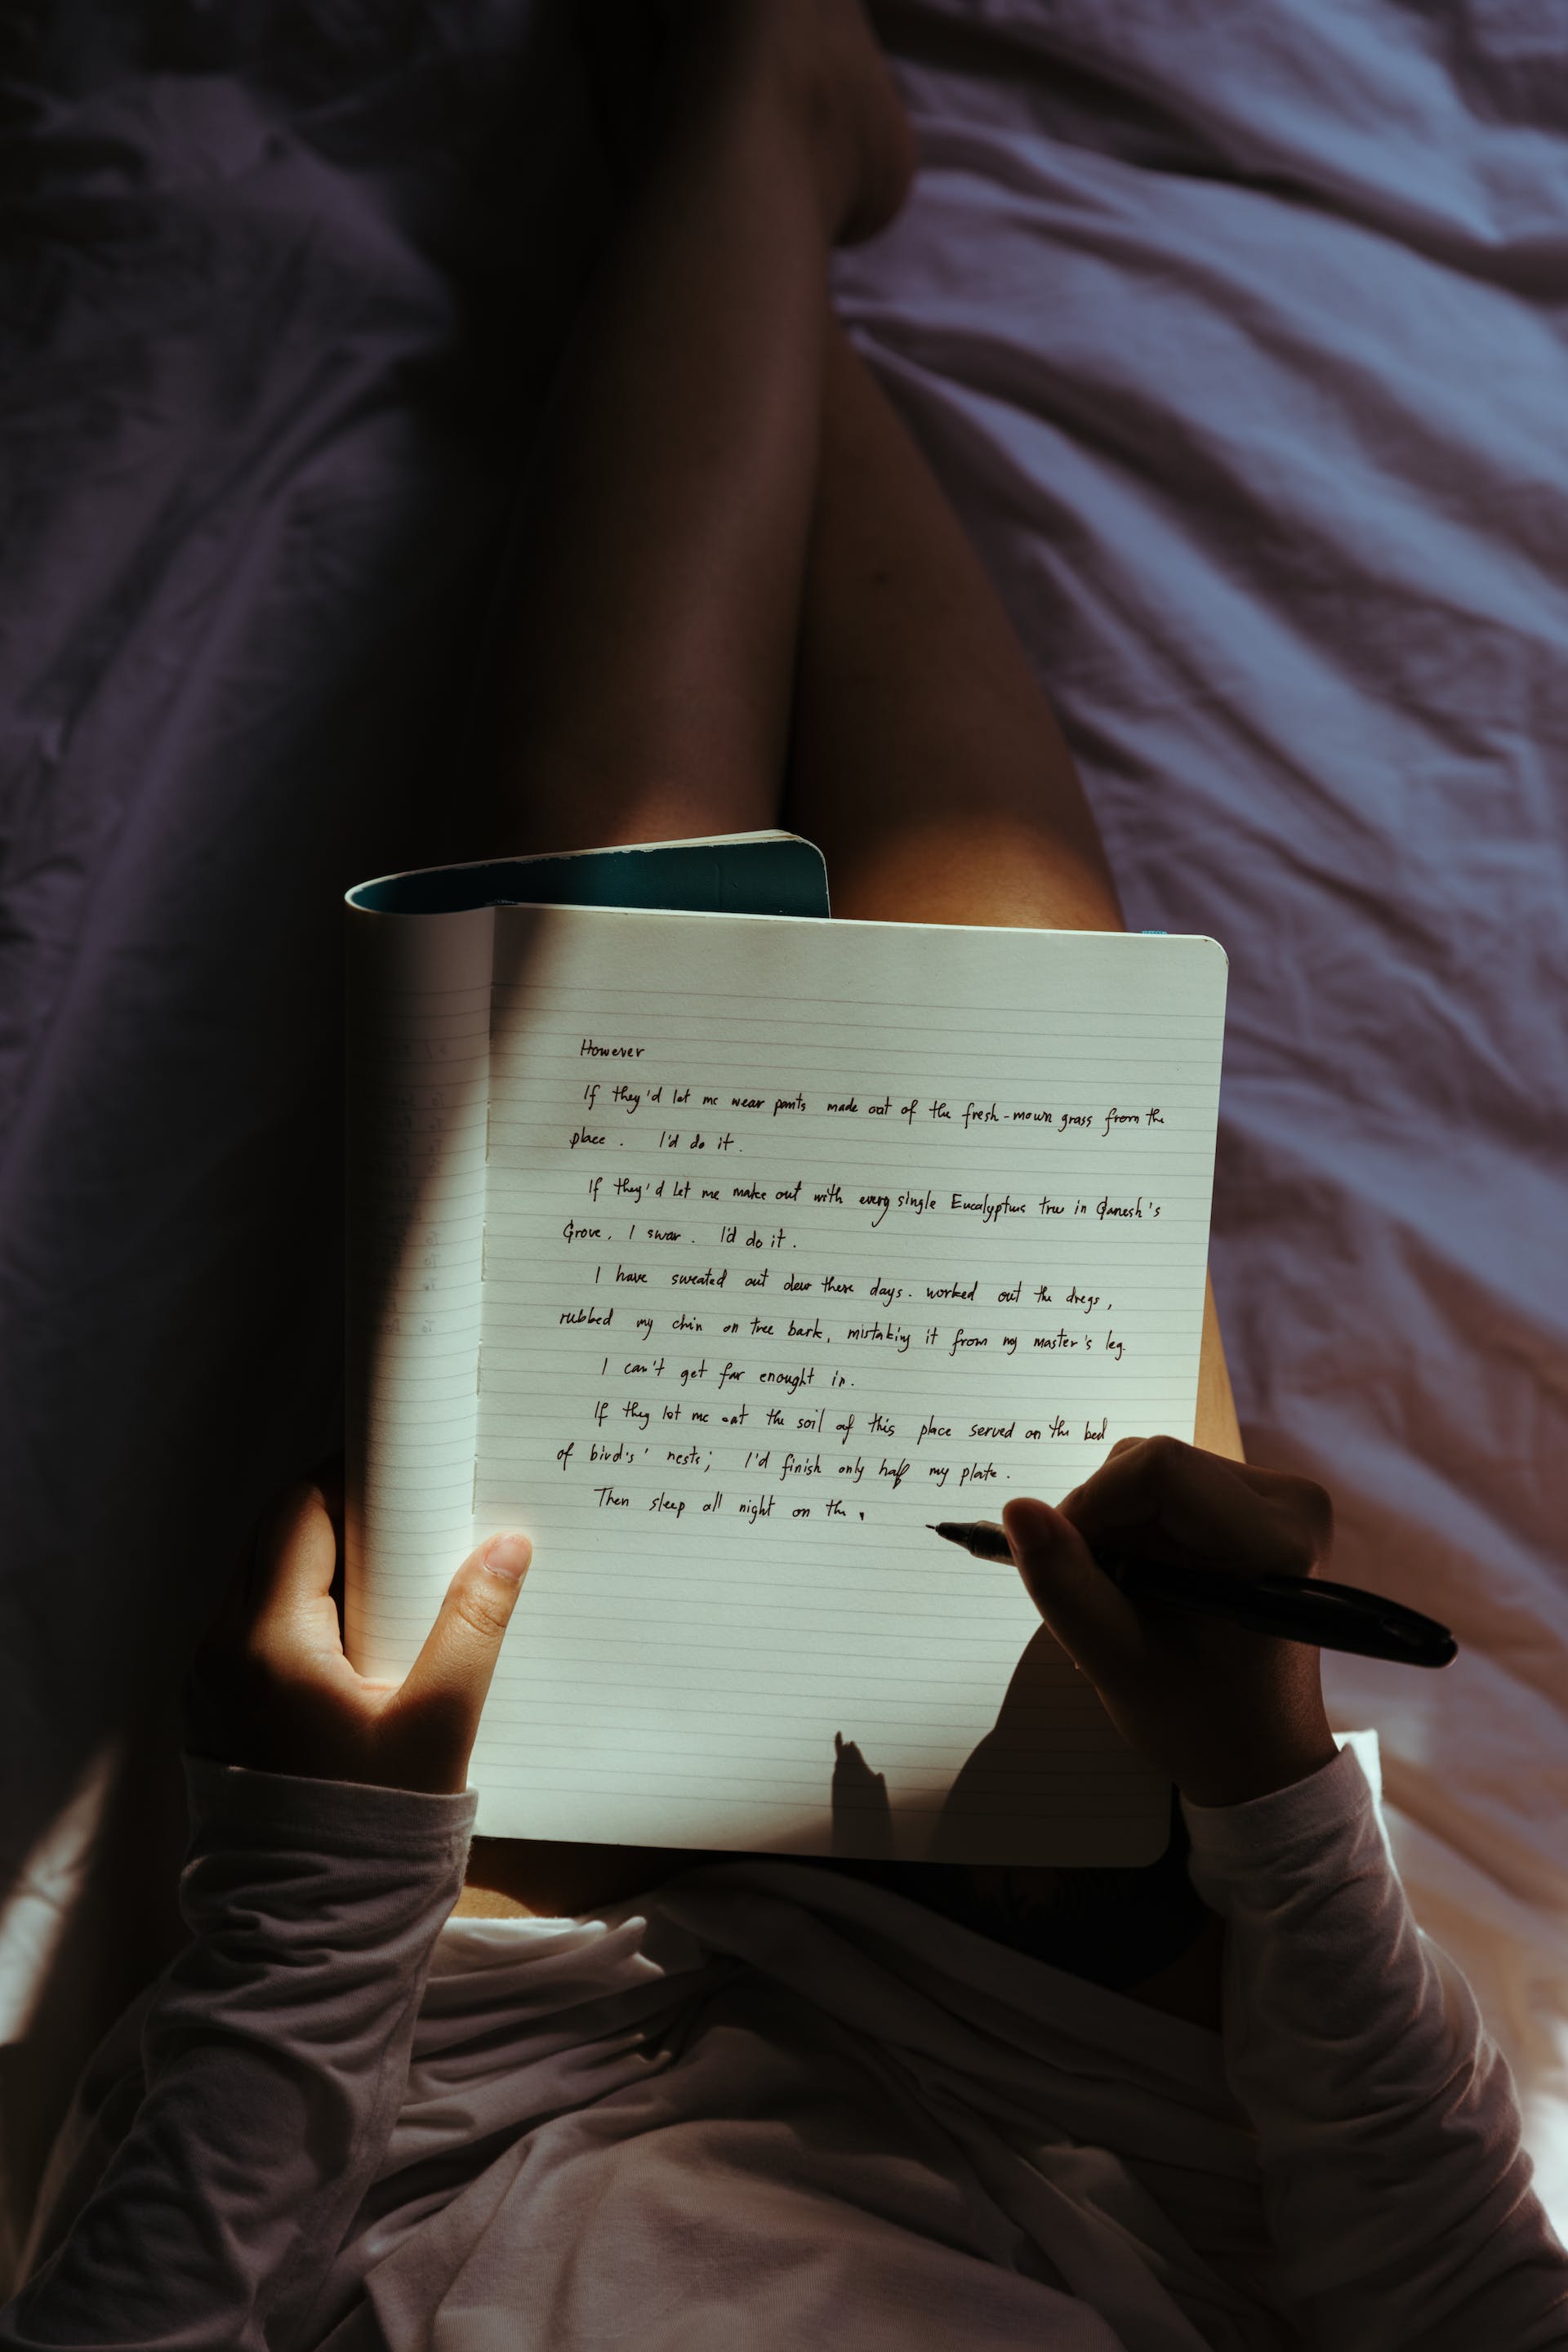 A woman writing in her diary | Source: Pexels